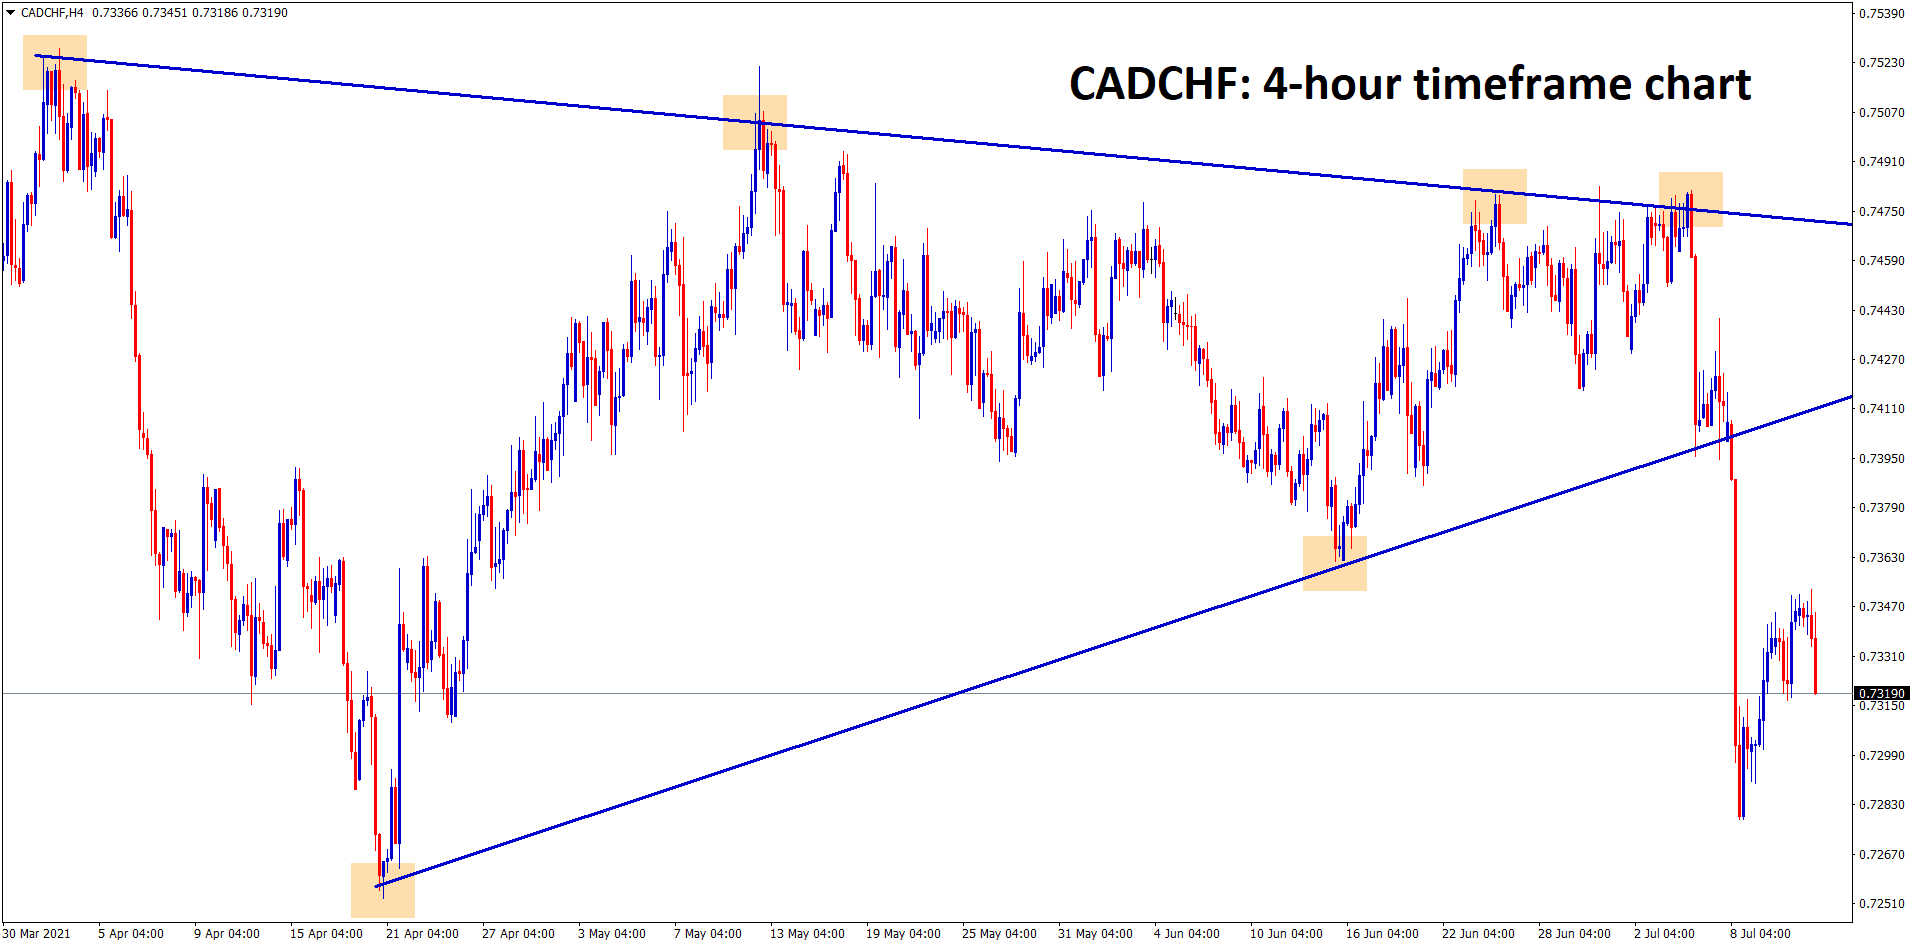 CADCHF has broken the bottom of the symmetrical triangle pattern and its trying to continue the fall.